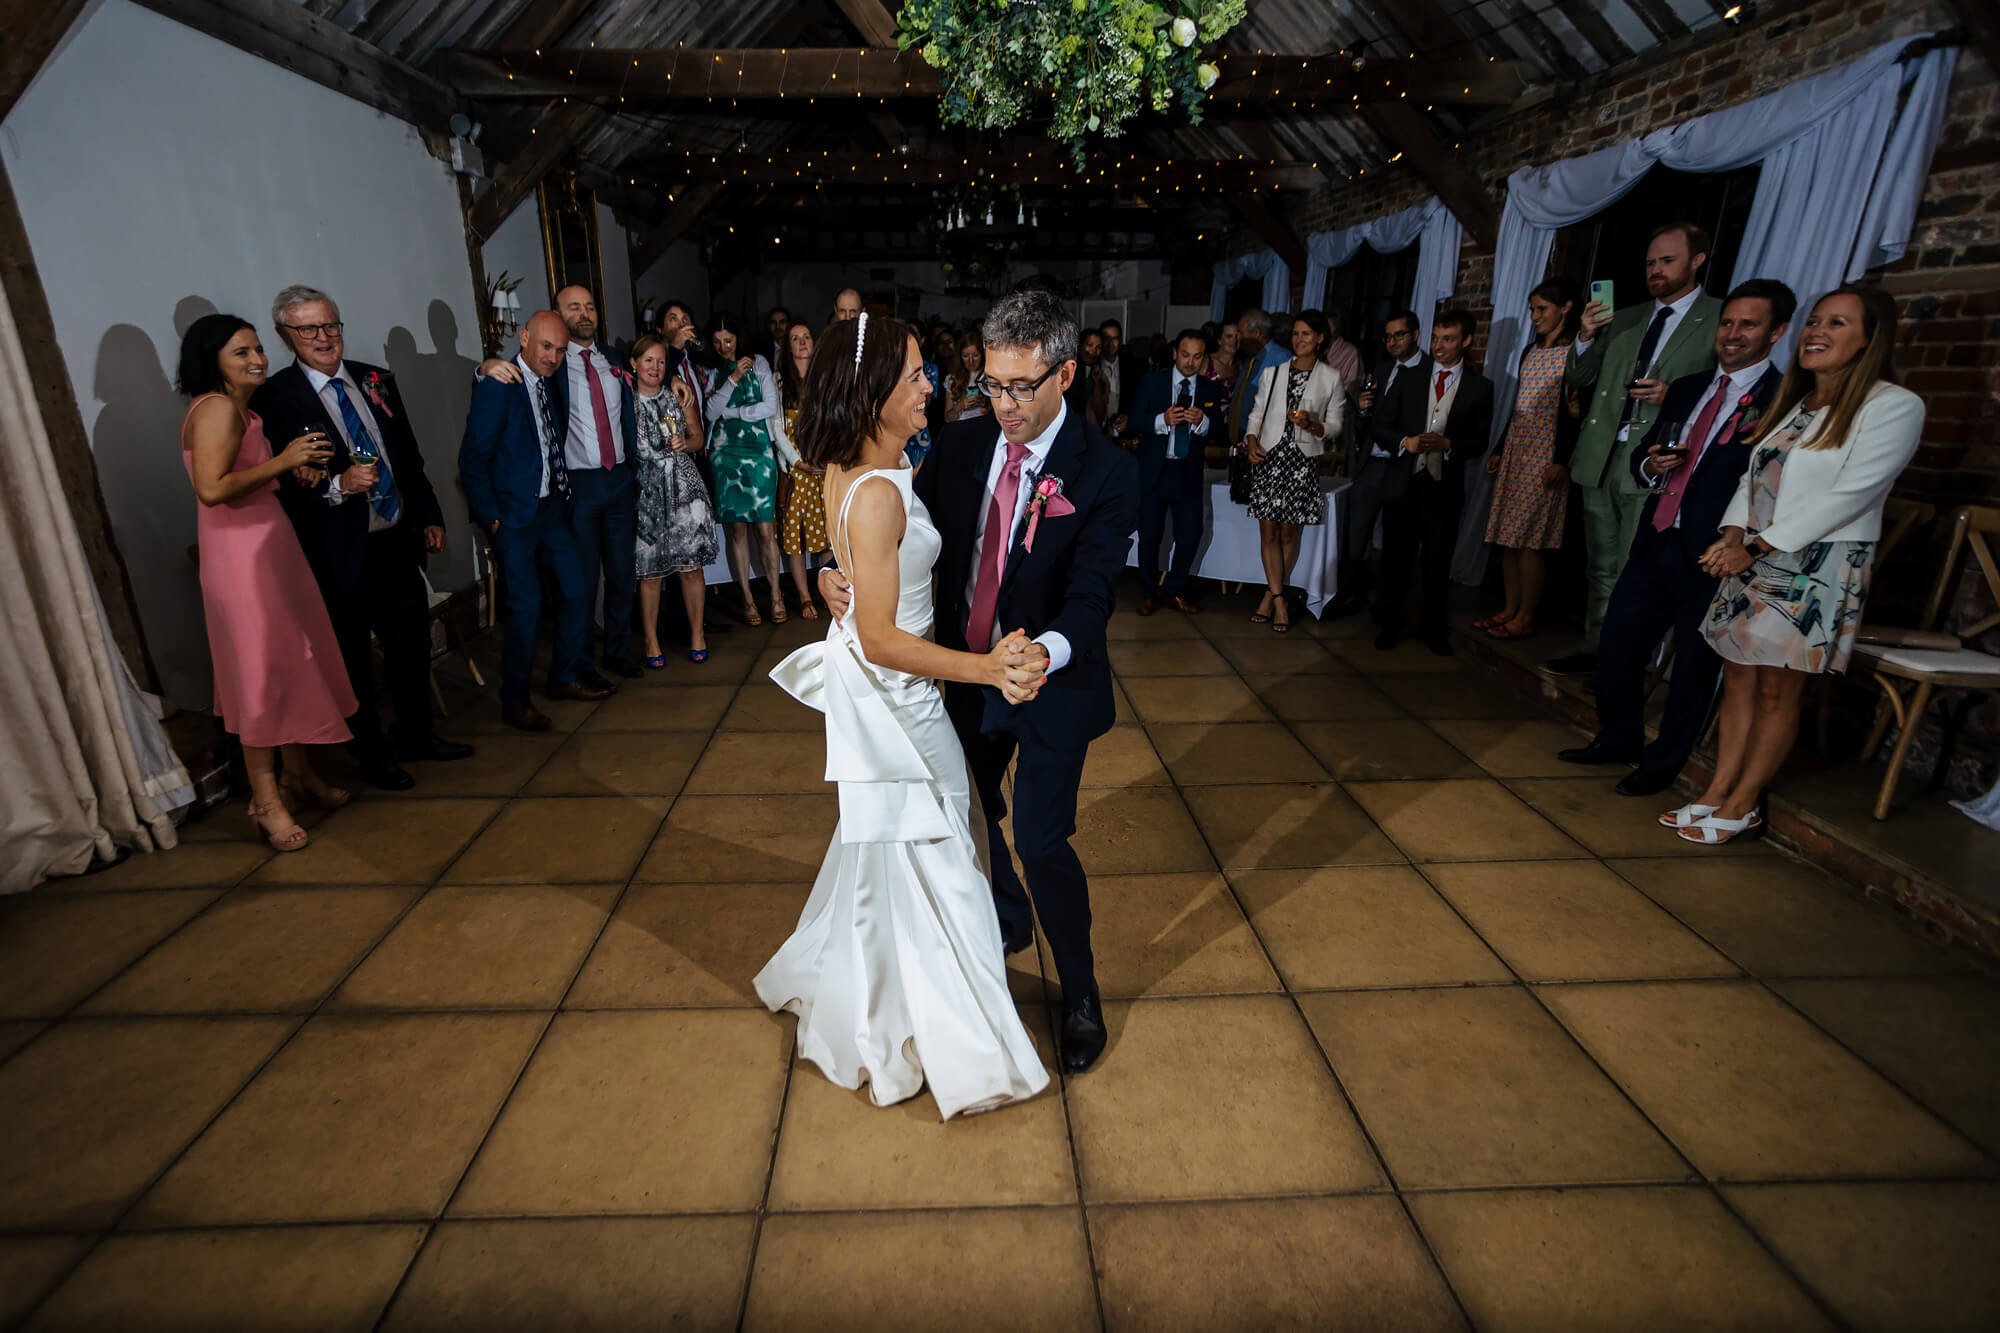 First dance as man and wife at the wedding